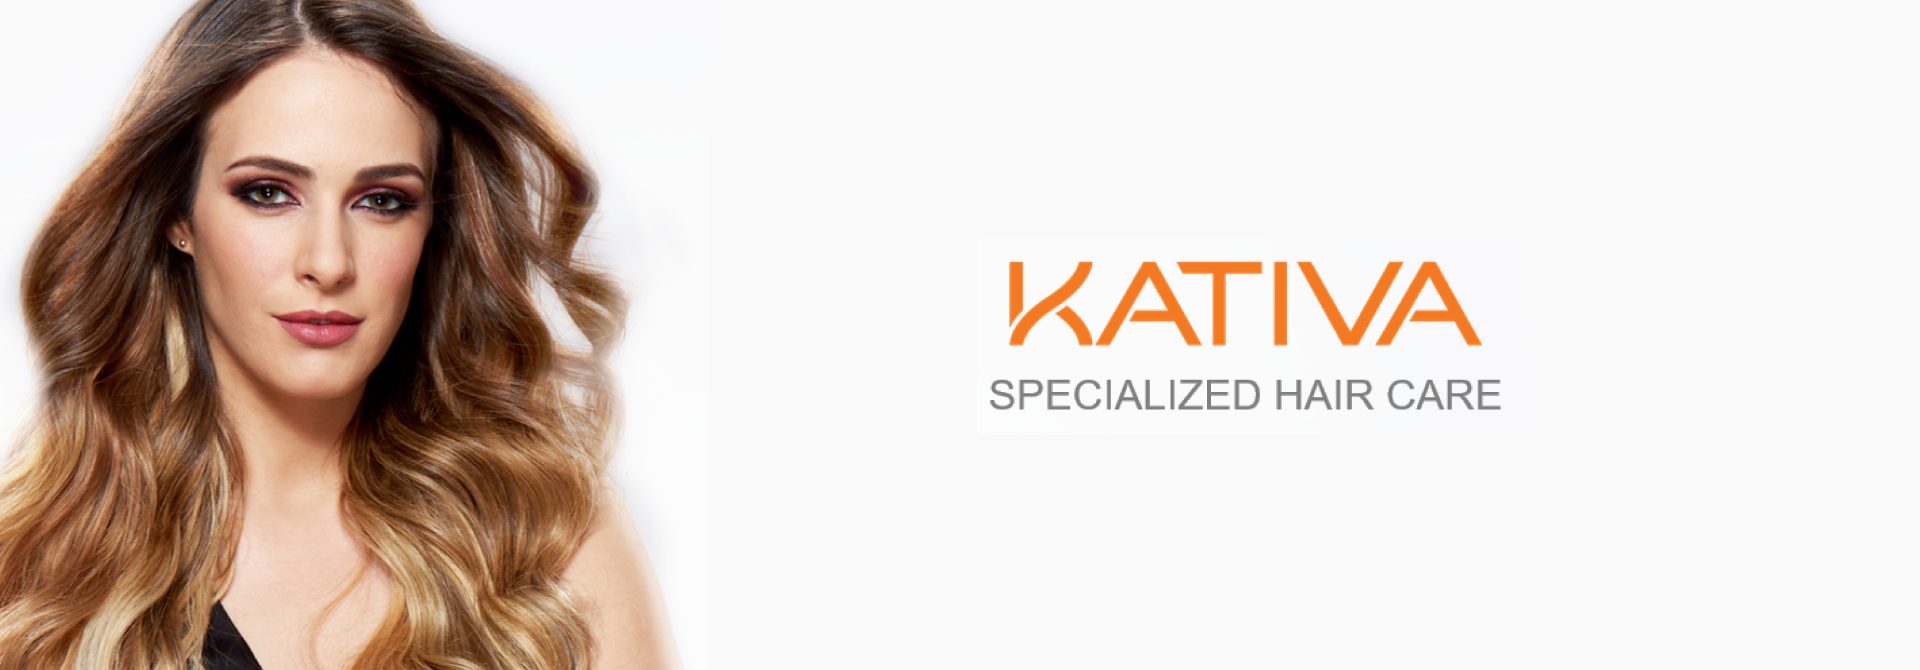 kativa banner brand page